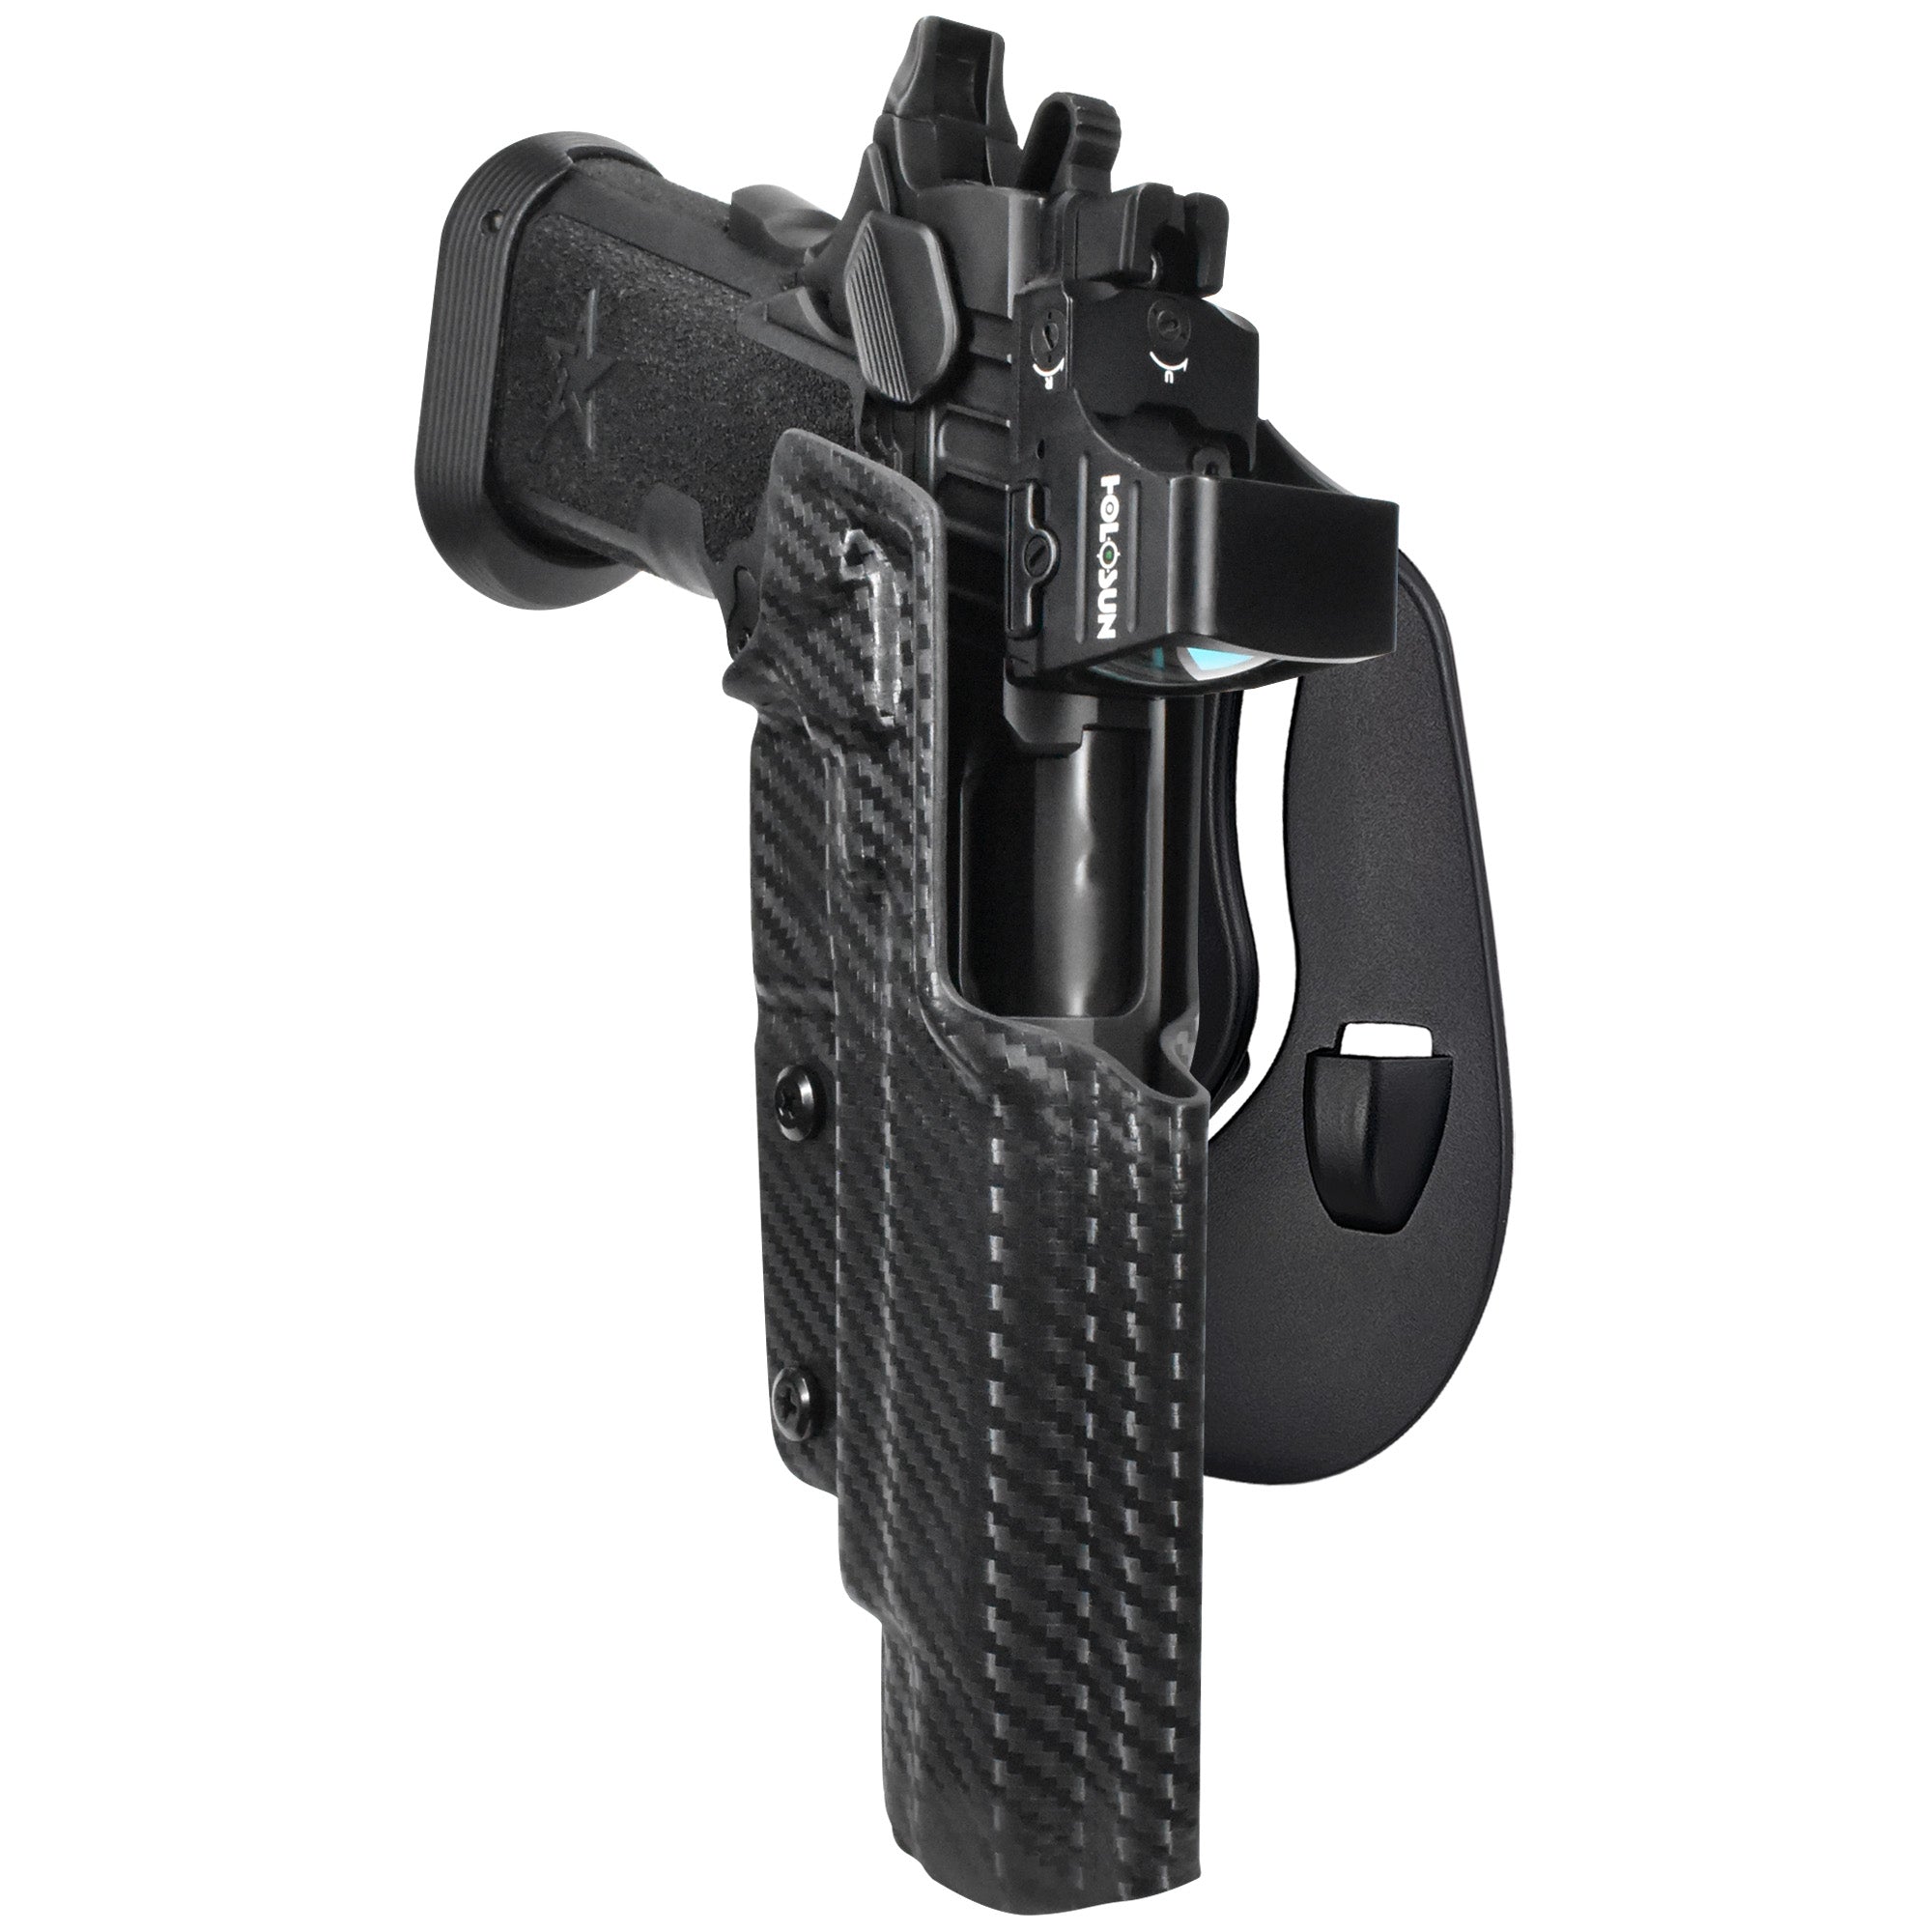 Staccato XL OWB Paddle Holster in Carbon Fiber